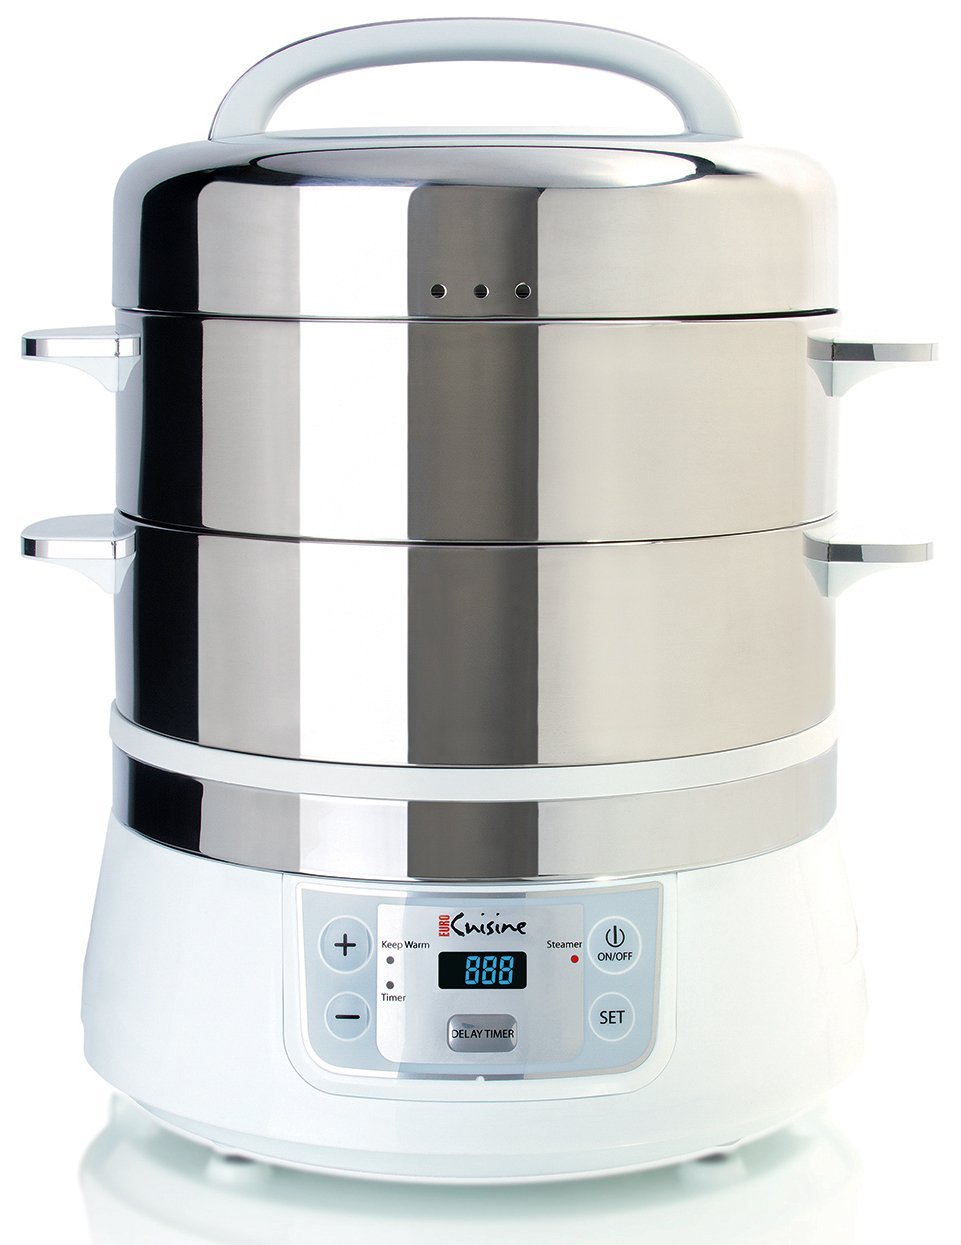 Euro Cuisine FS2500 Electric Stainless Steel Food Steamer-How it Works